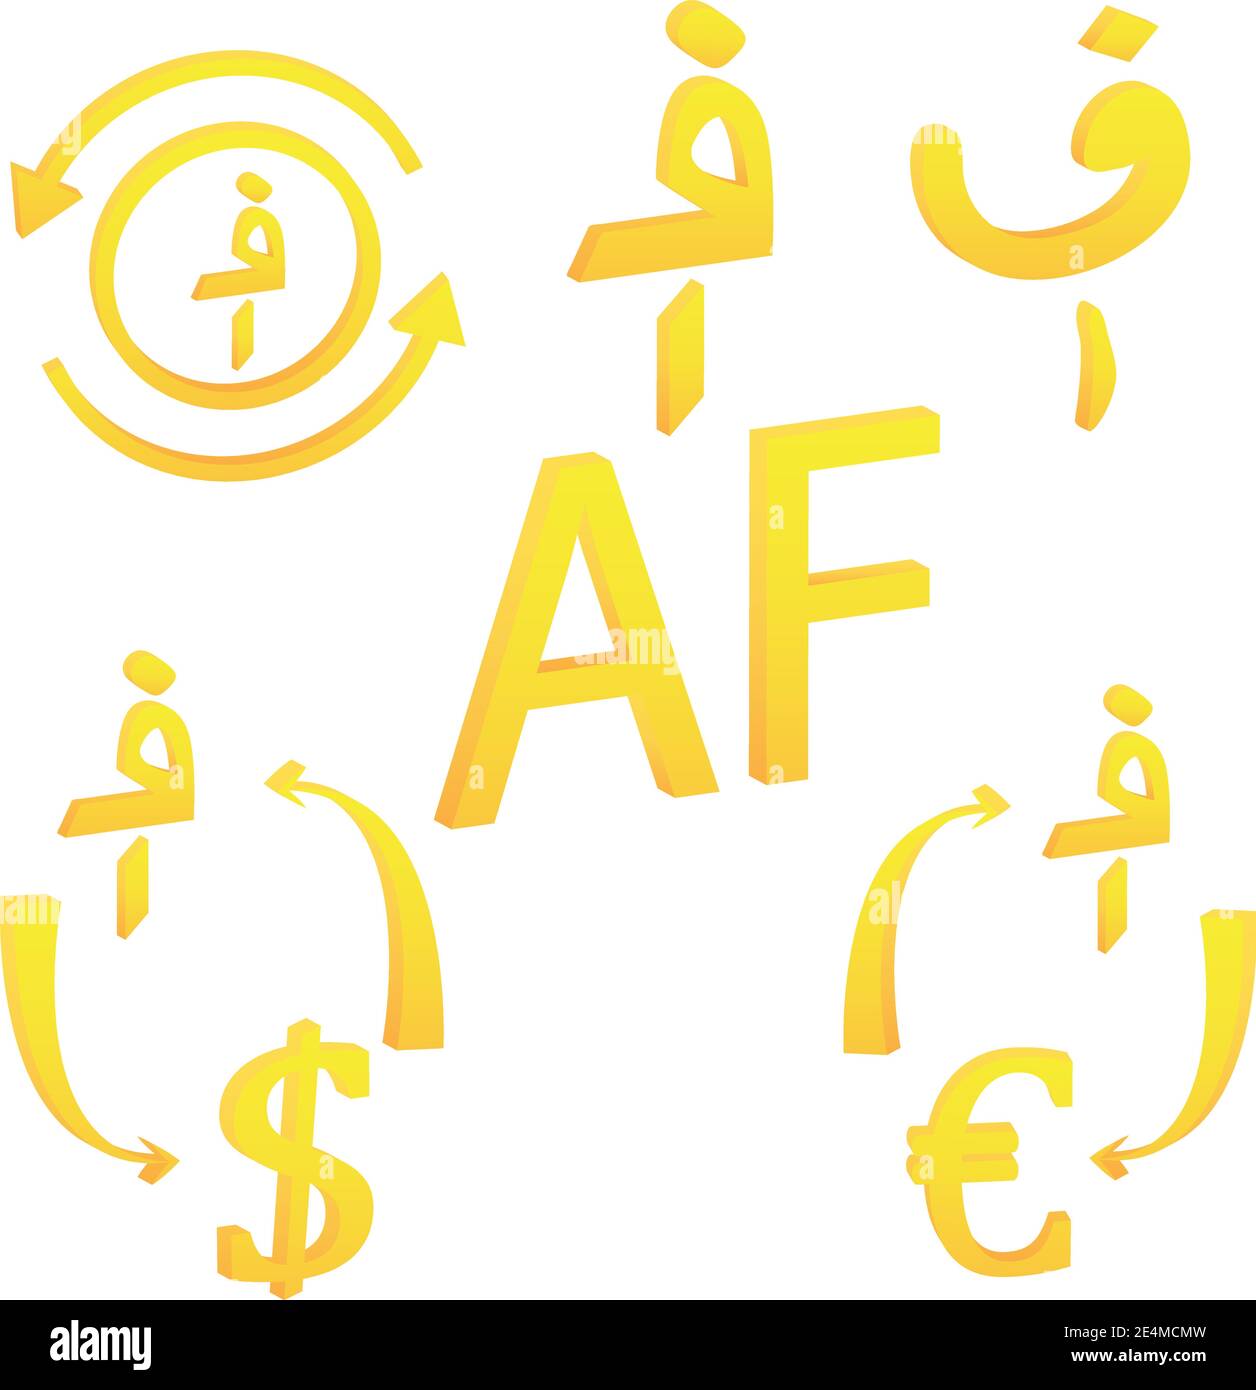 Afghan Afghani of Afghanistan currency symbol icon vector illustration Stock Vector